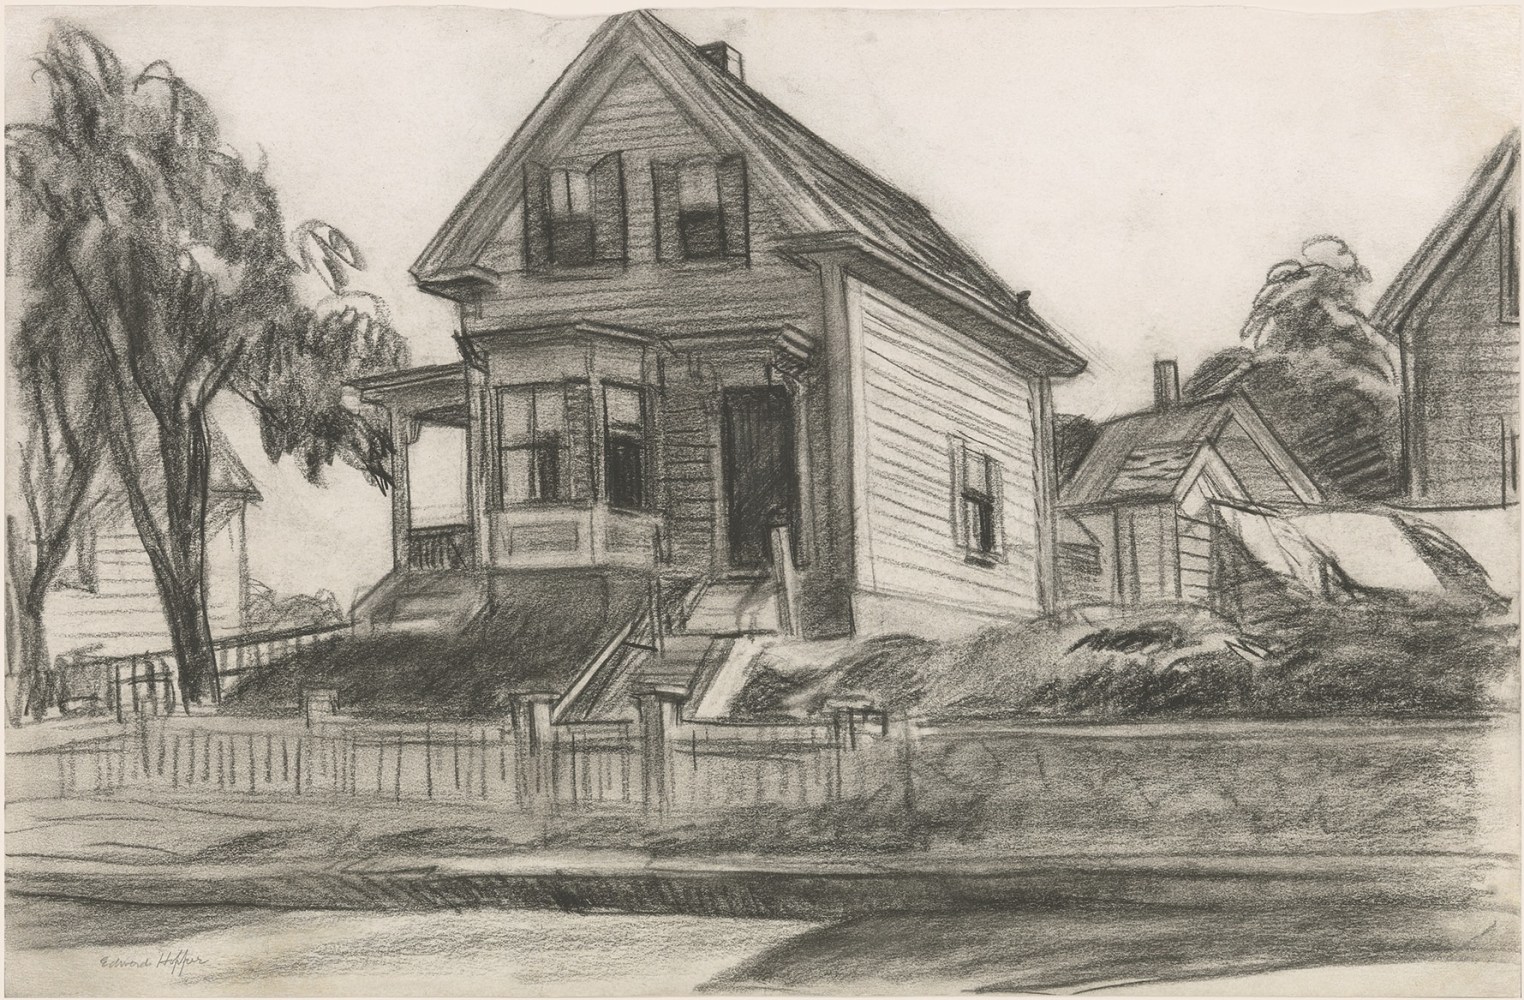 Edward Hopper&amp;nbsp;(1882-1967)&amp;nbsp;

House in Gloucester, 1922

Charcoal

11 7/8 x 18 inches